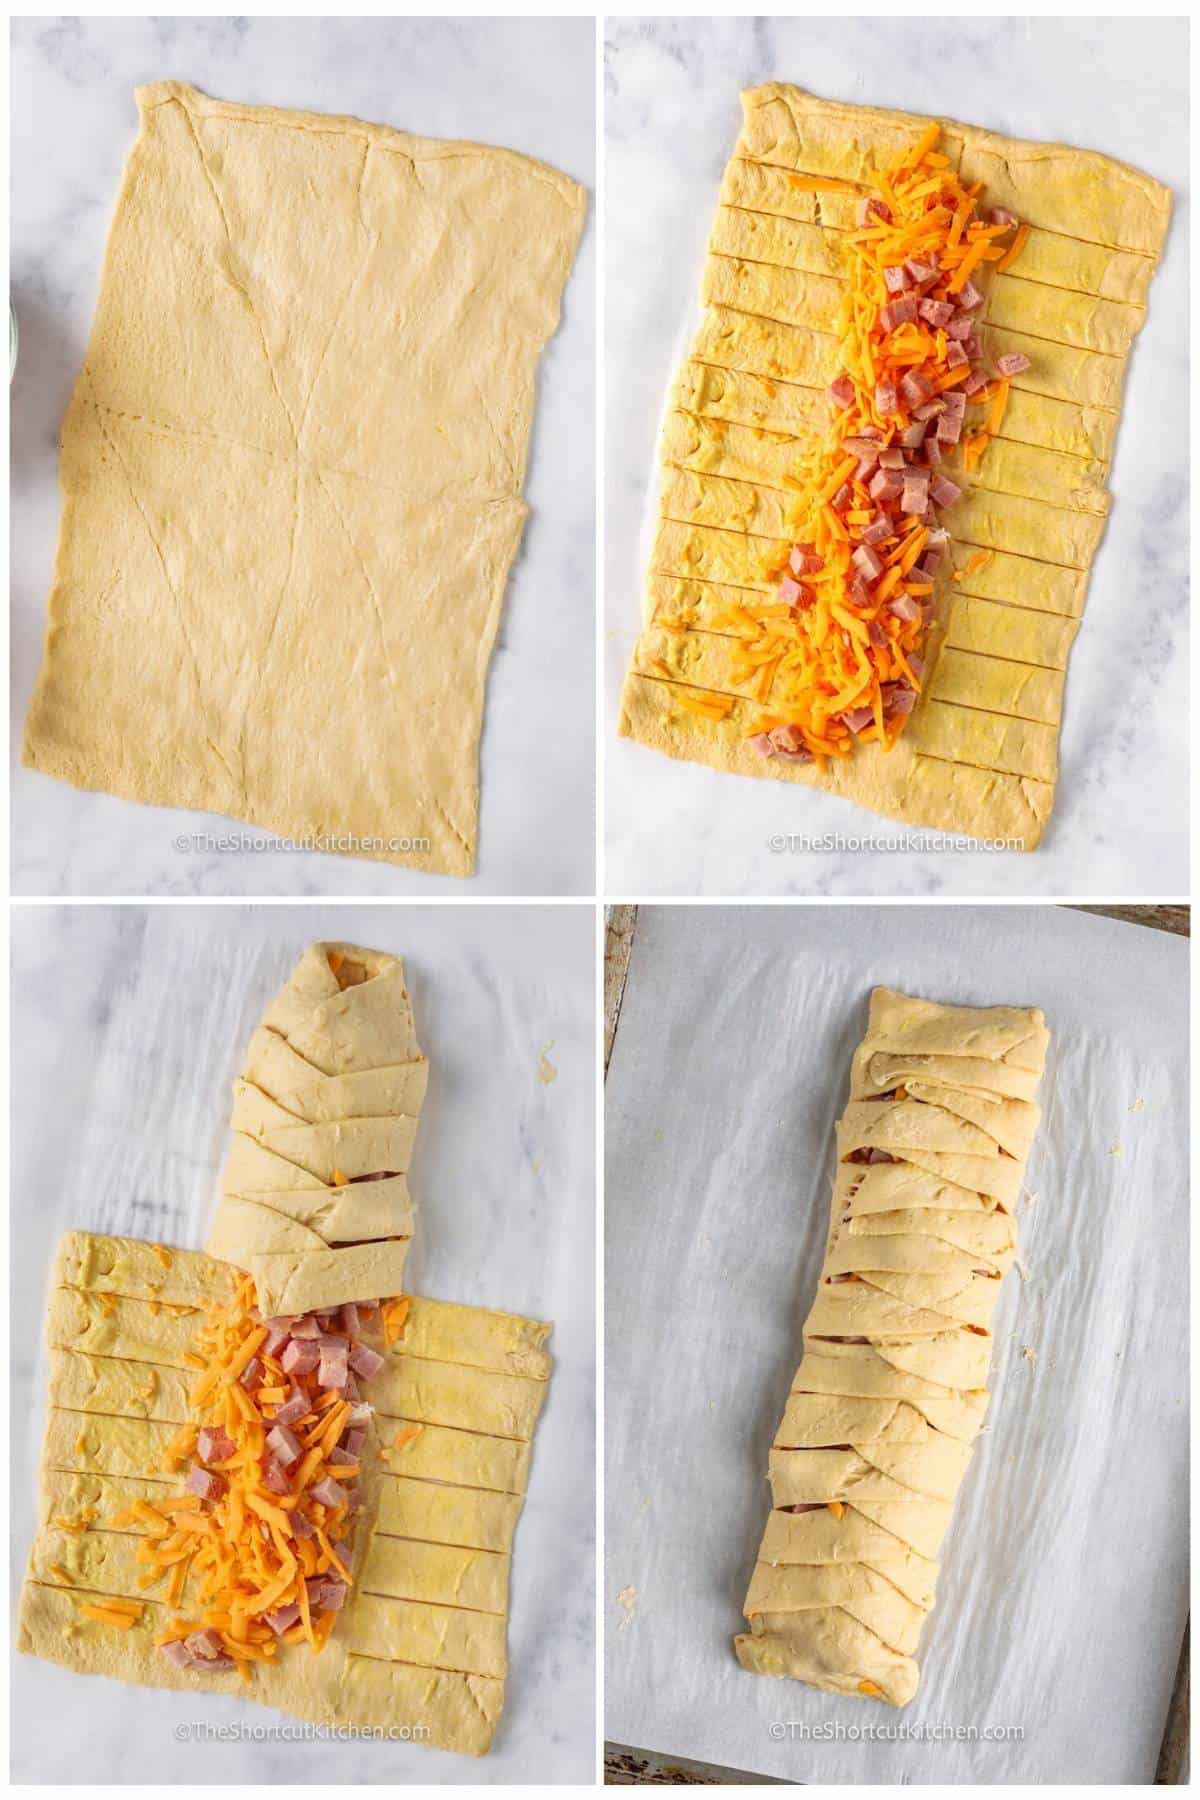 process of adding filling and folding Ham & Cheese Crescent Braid